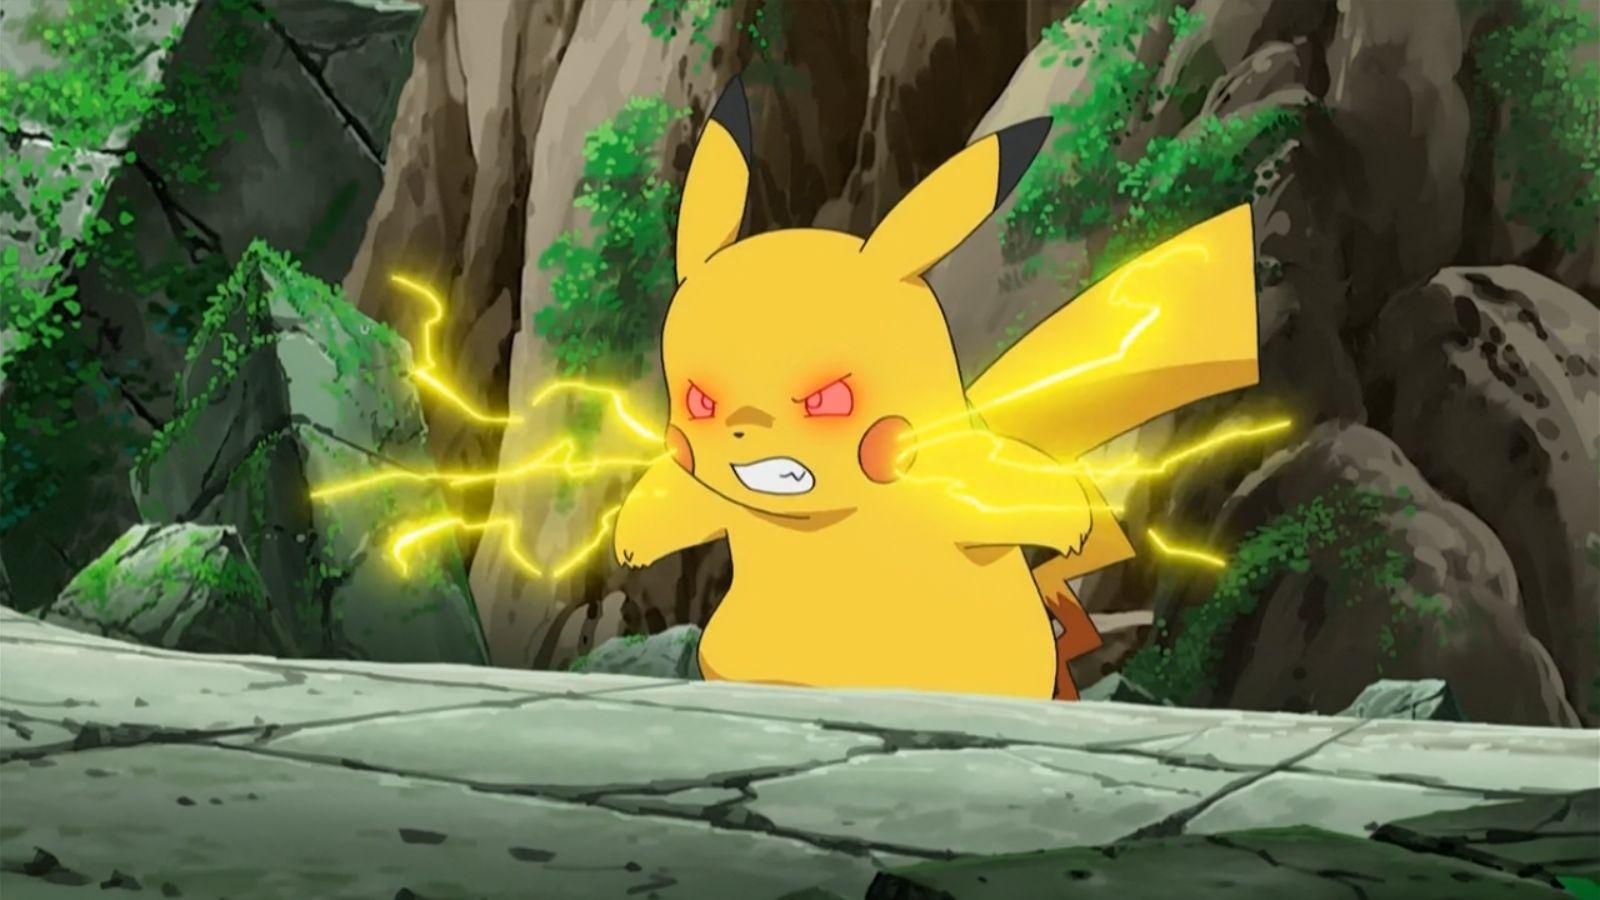 Angry Pikachu from Pokemon anime.